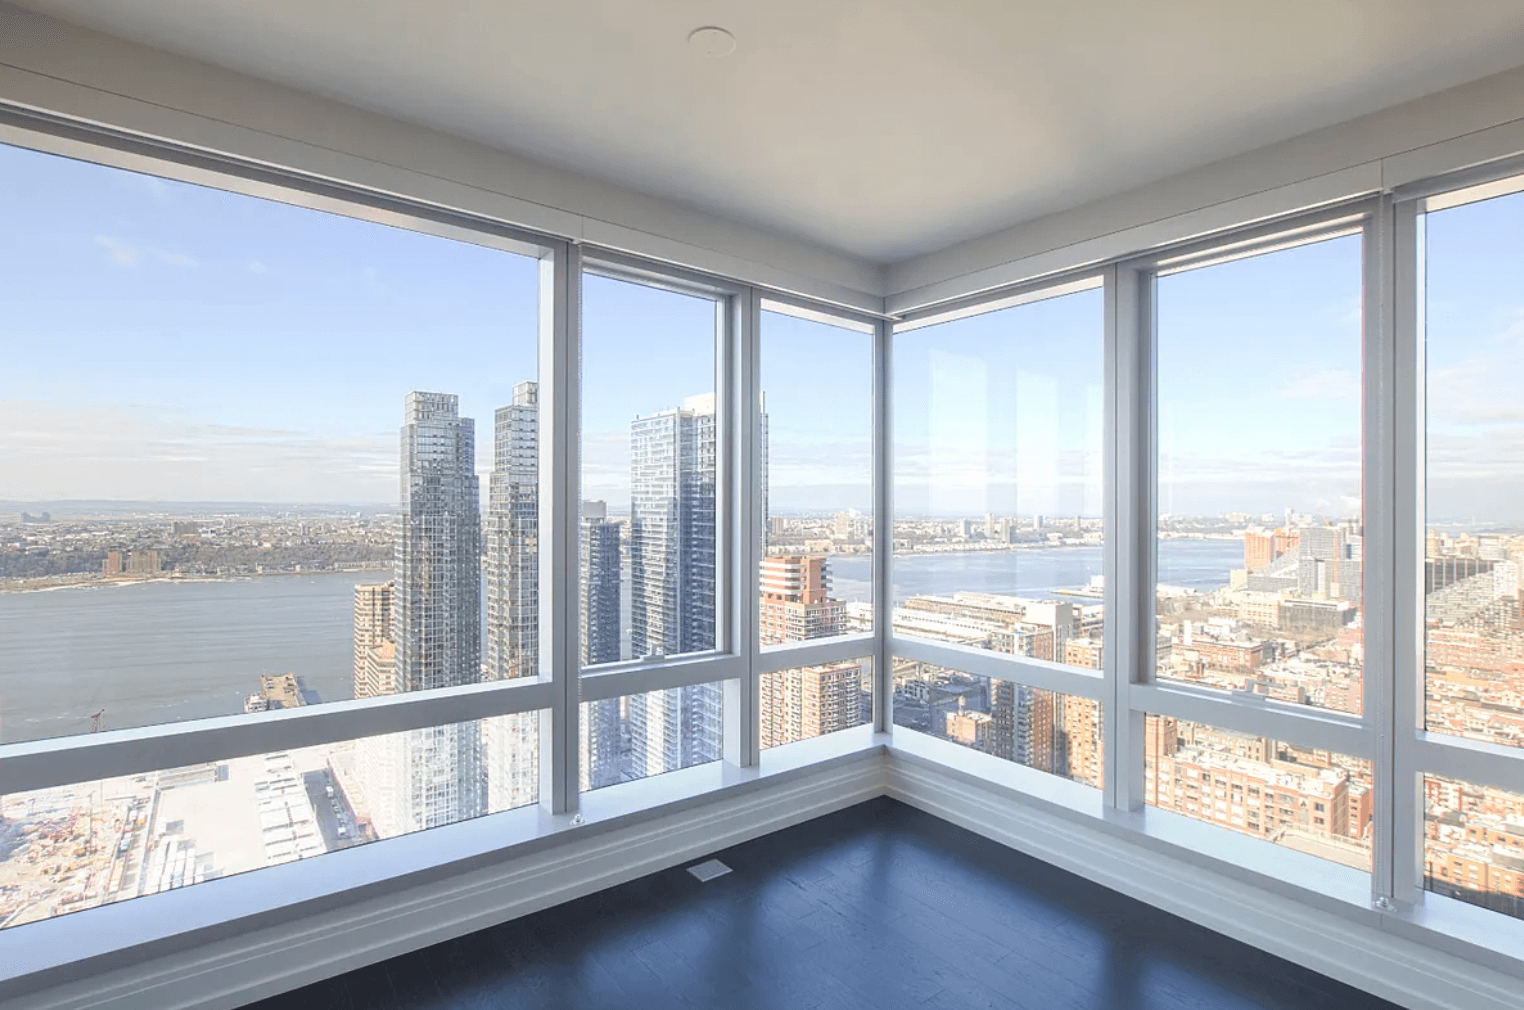 Luxury 2 Bed/2 Baths Amenity filled building in Hudson Yards, W/D in Unit